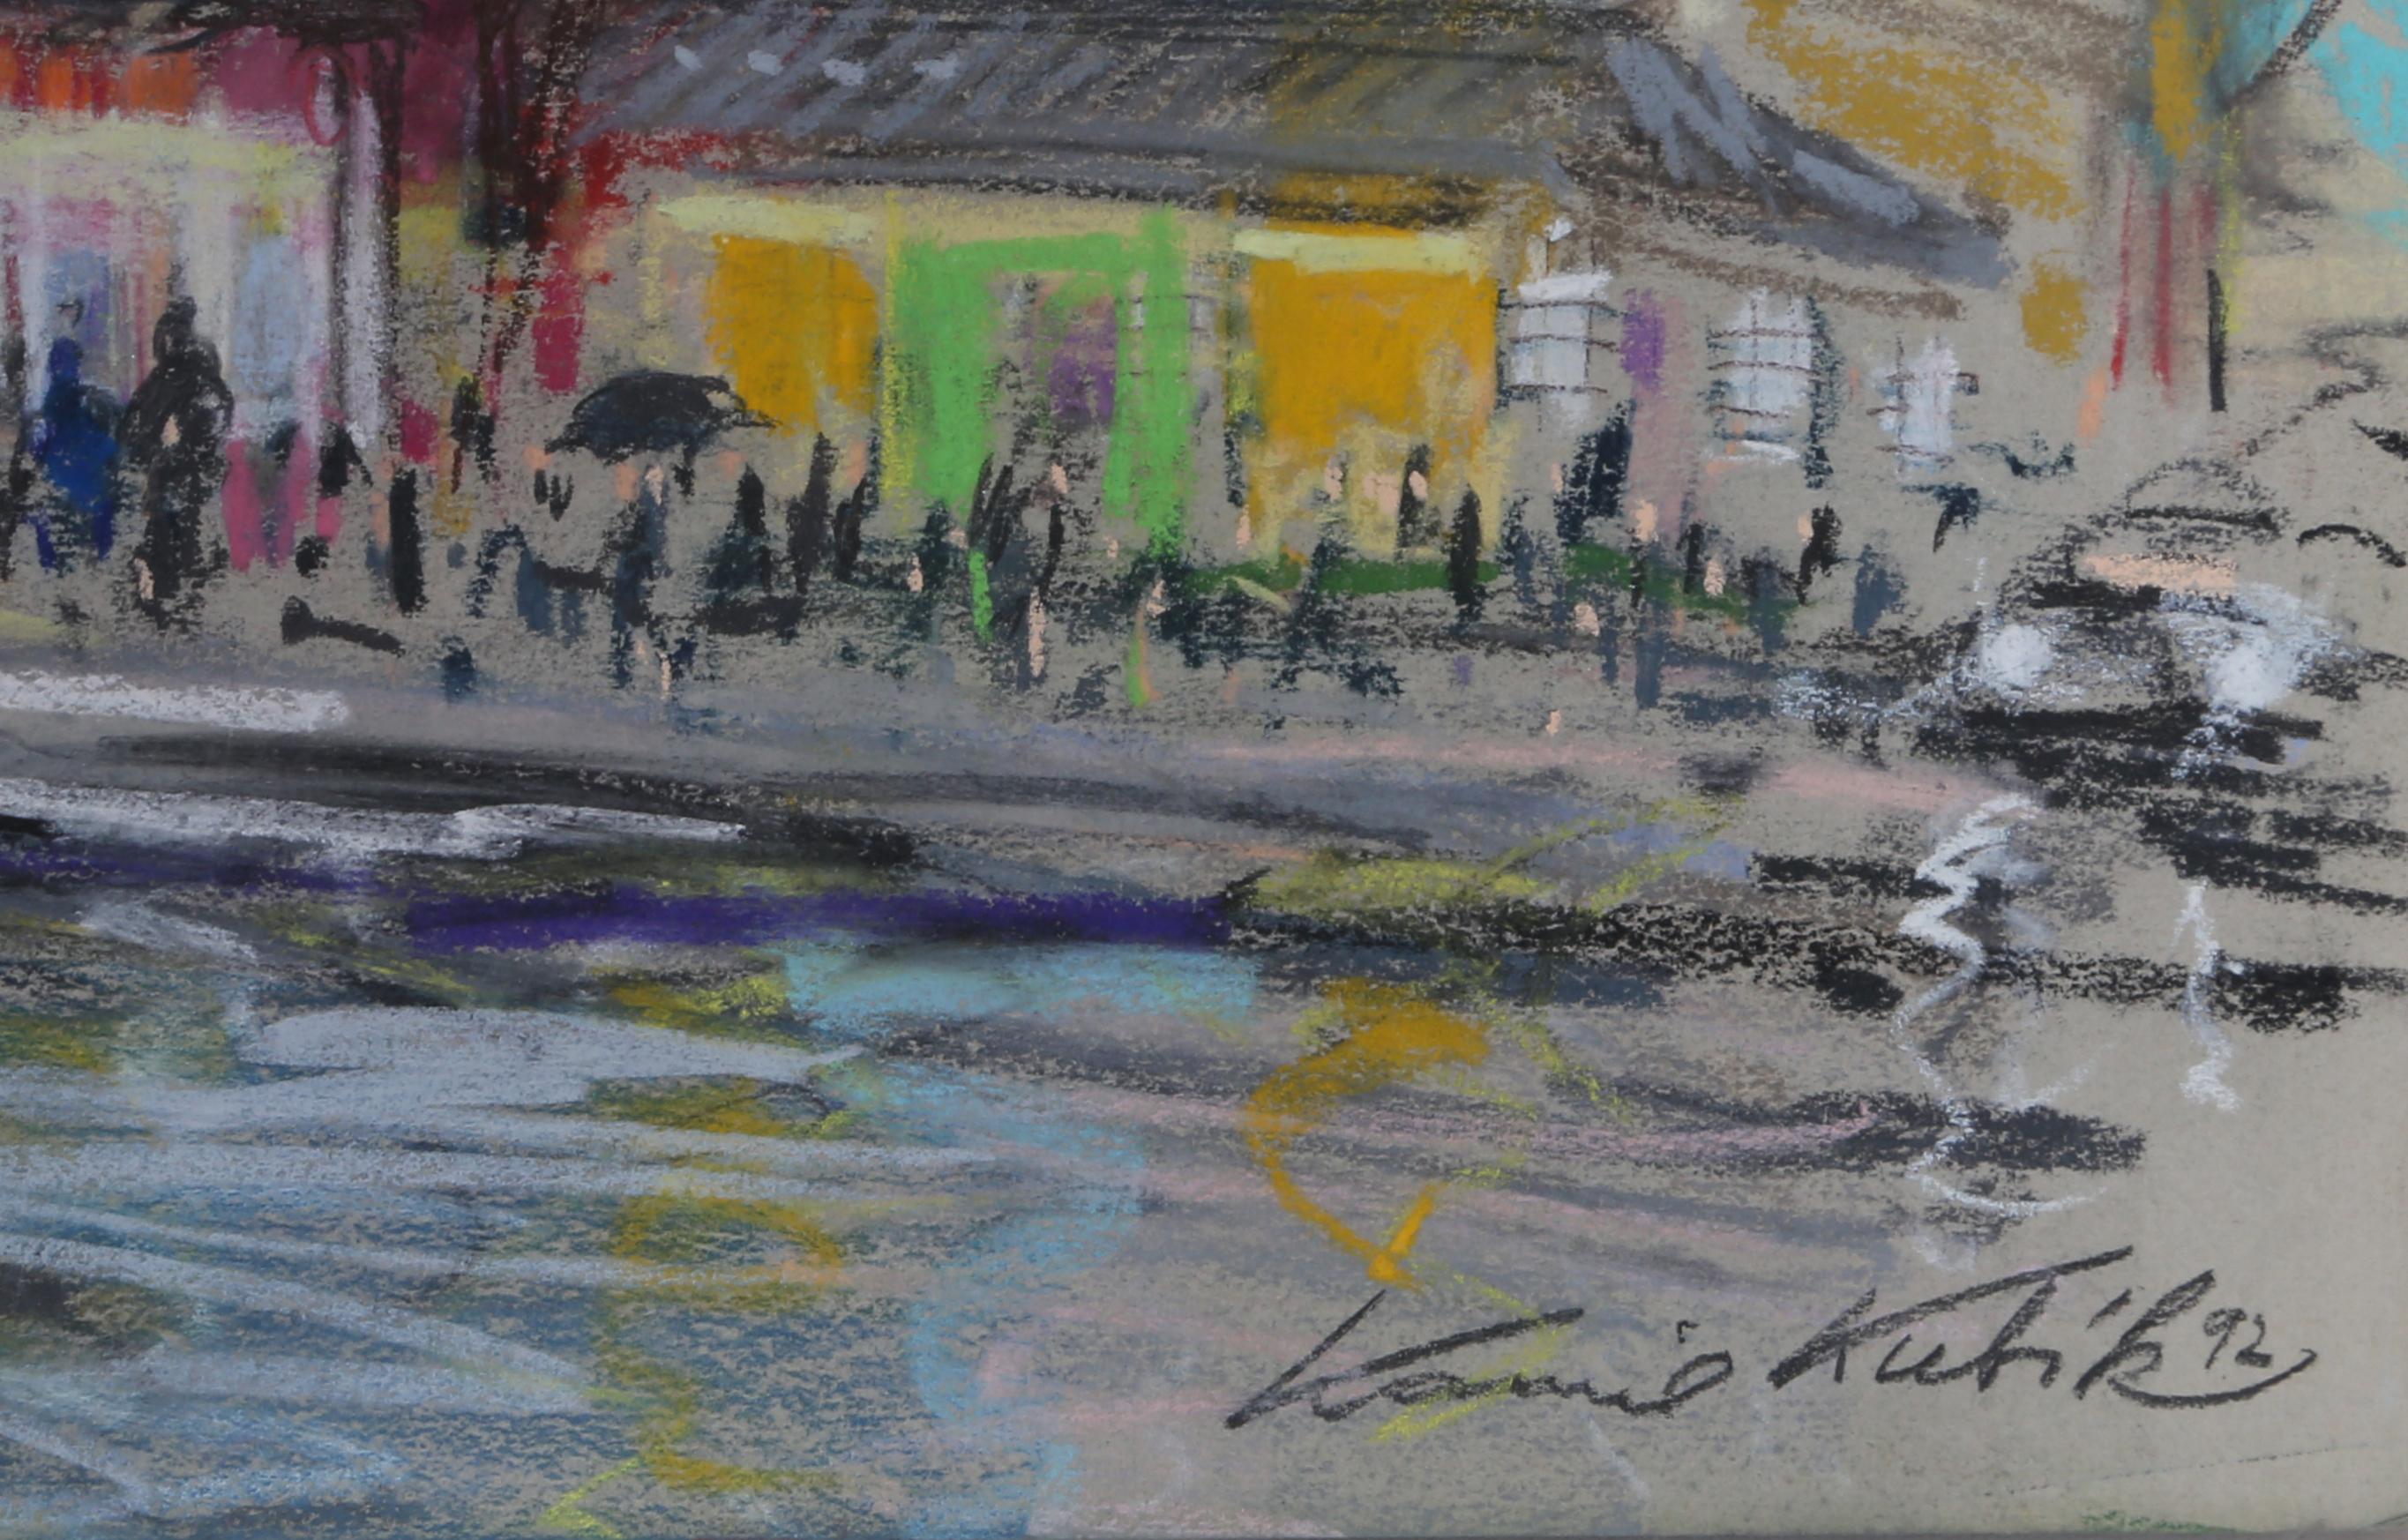 Chinatown Theater by Kamil Kubik, Czech/American (1930–2011)
Pastel on Paper, signed l.r.
Size: 19.5 x 25.5 in. (49.53 x 64.77 cm)